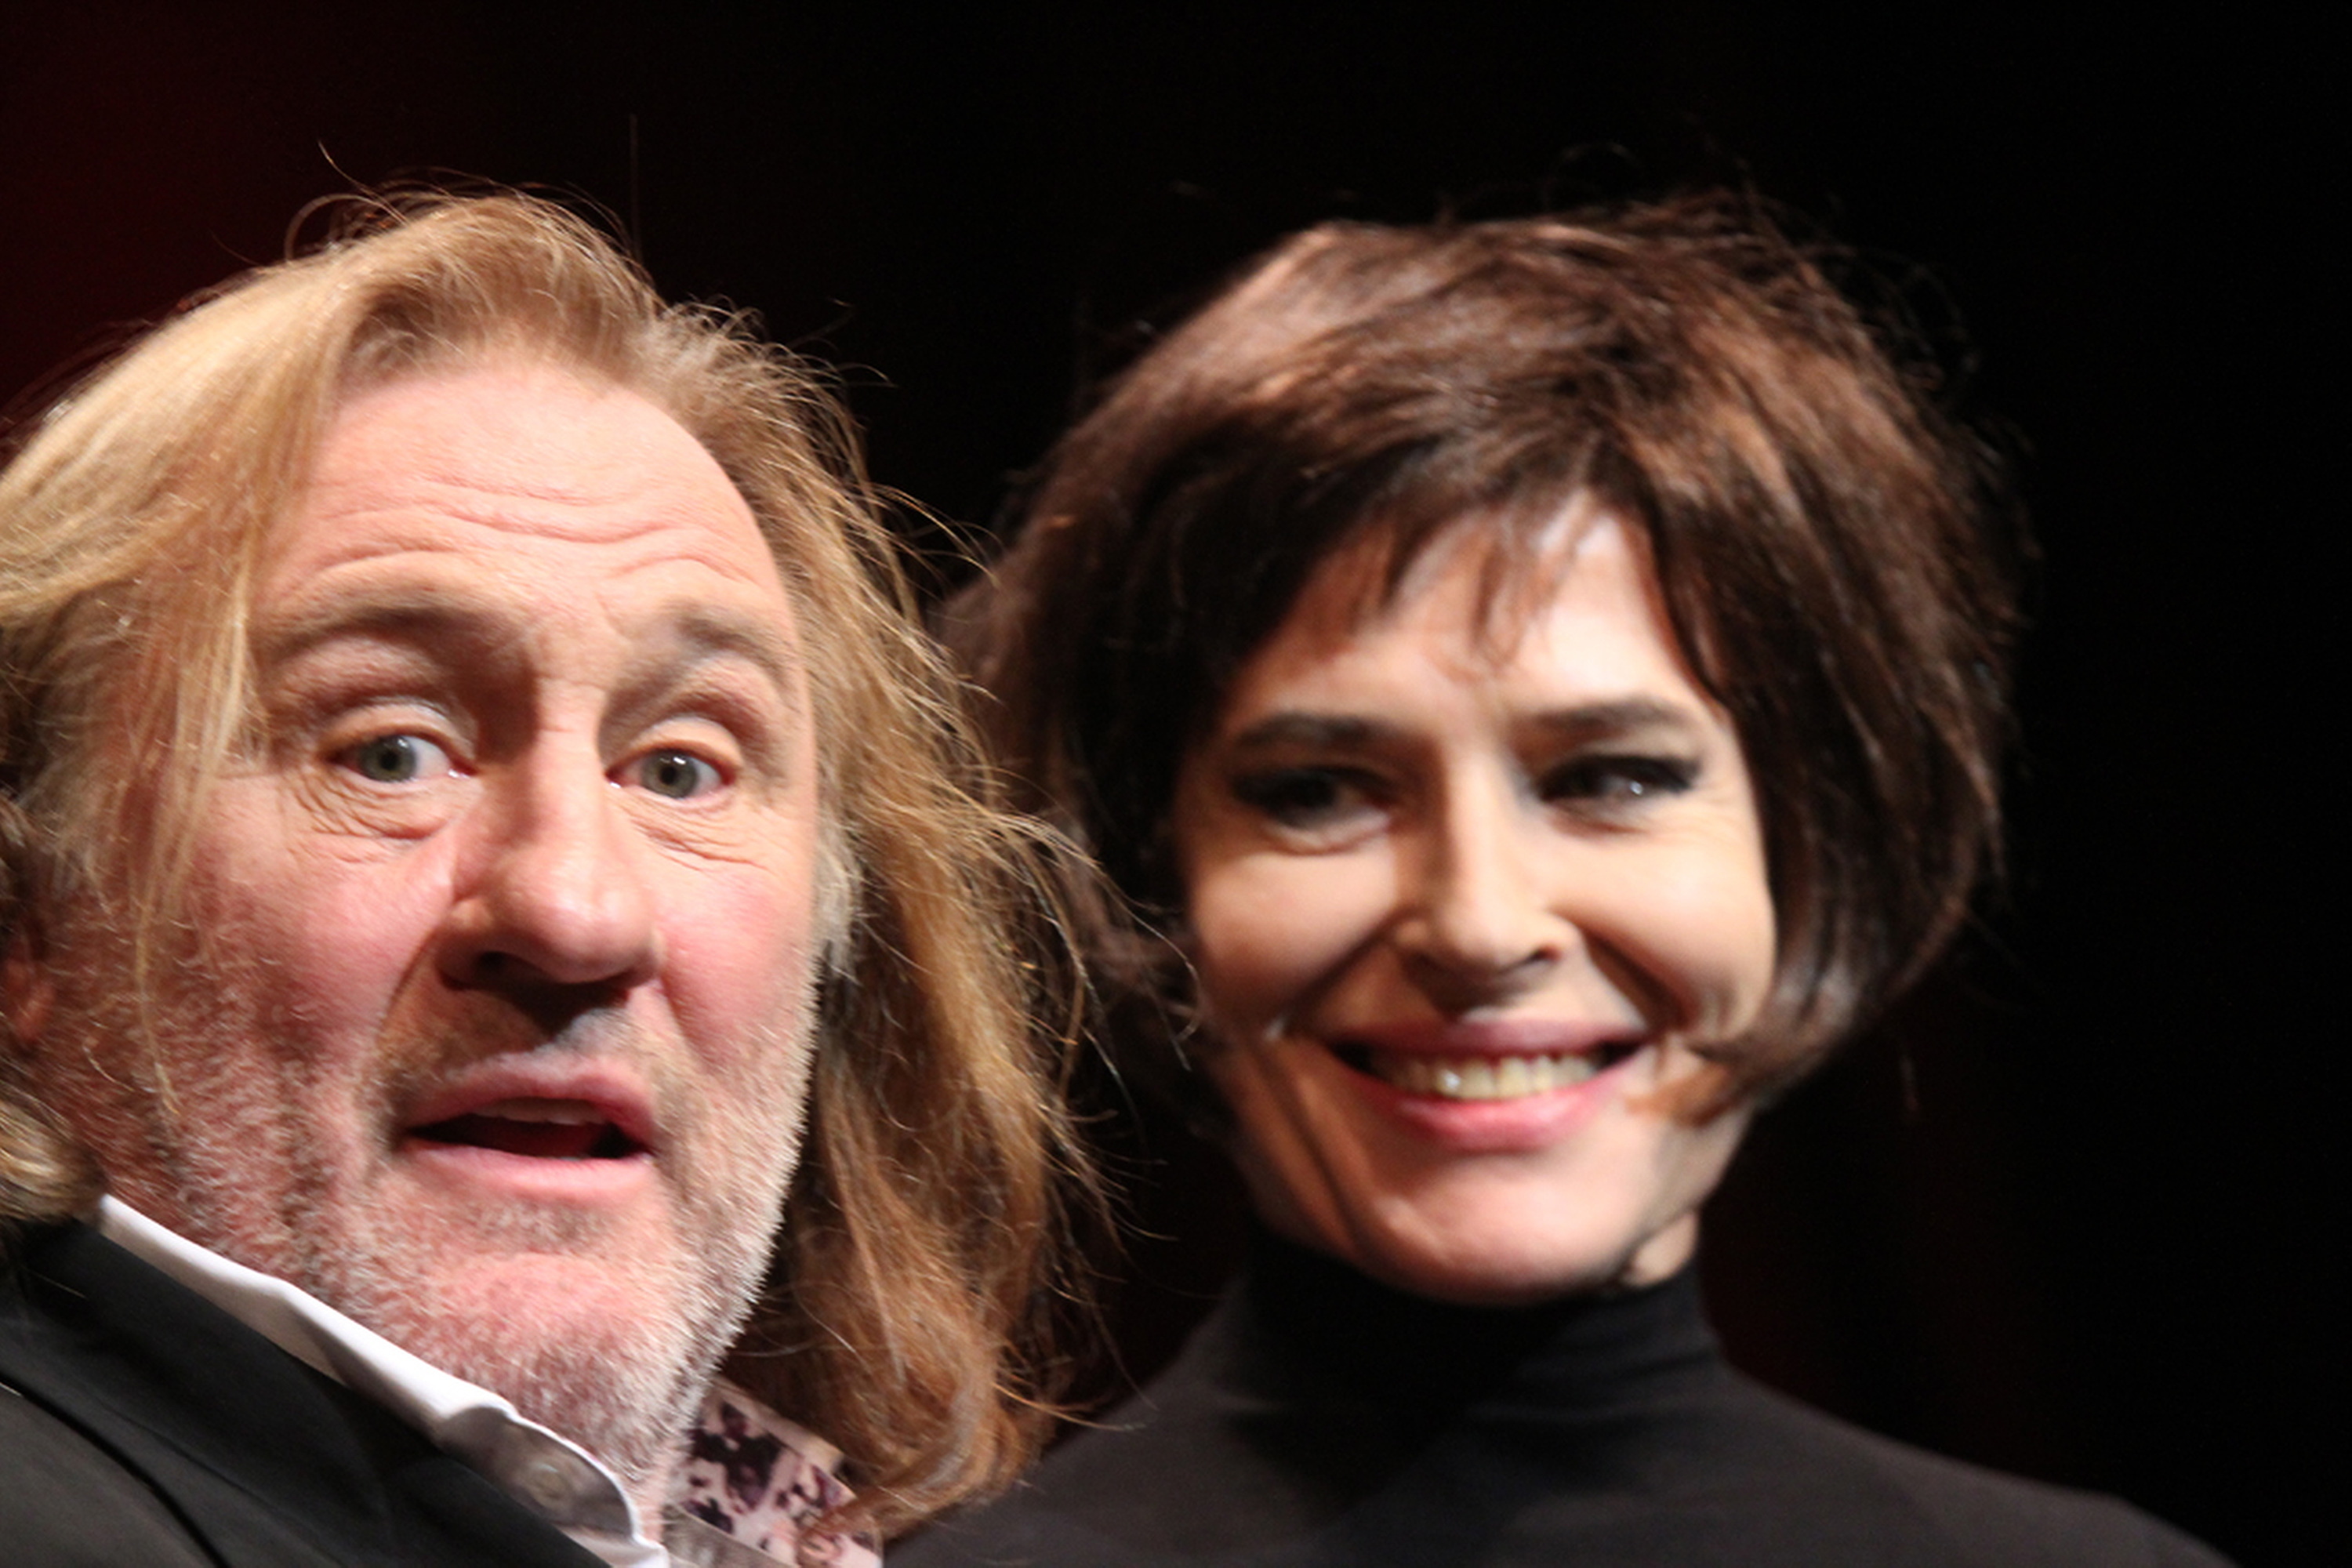 Gerard Depardieu awarded the Prix Lumiere for his career achievements | Picture 99877